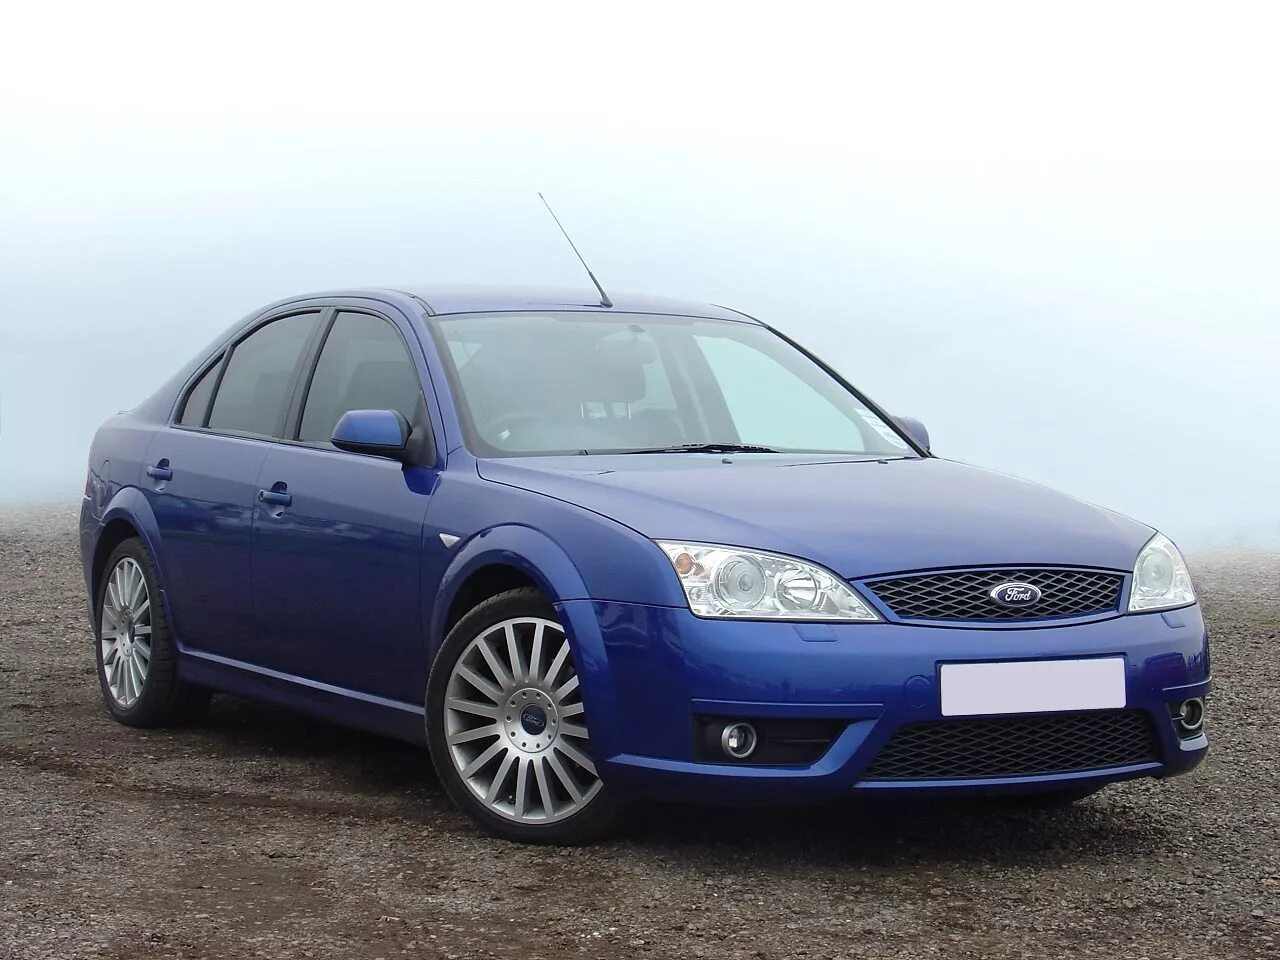 2000 2007 года. Ford Mondeo st220. Форд Мондео 3. Мондео 3 st220. Ford Mondeo St.